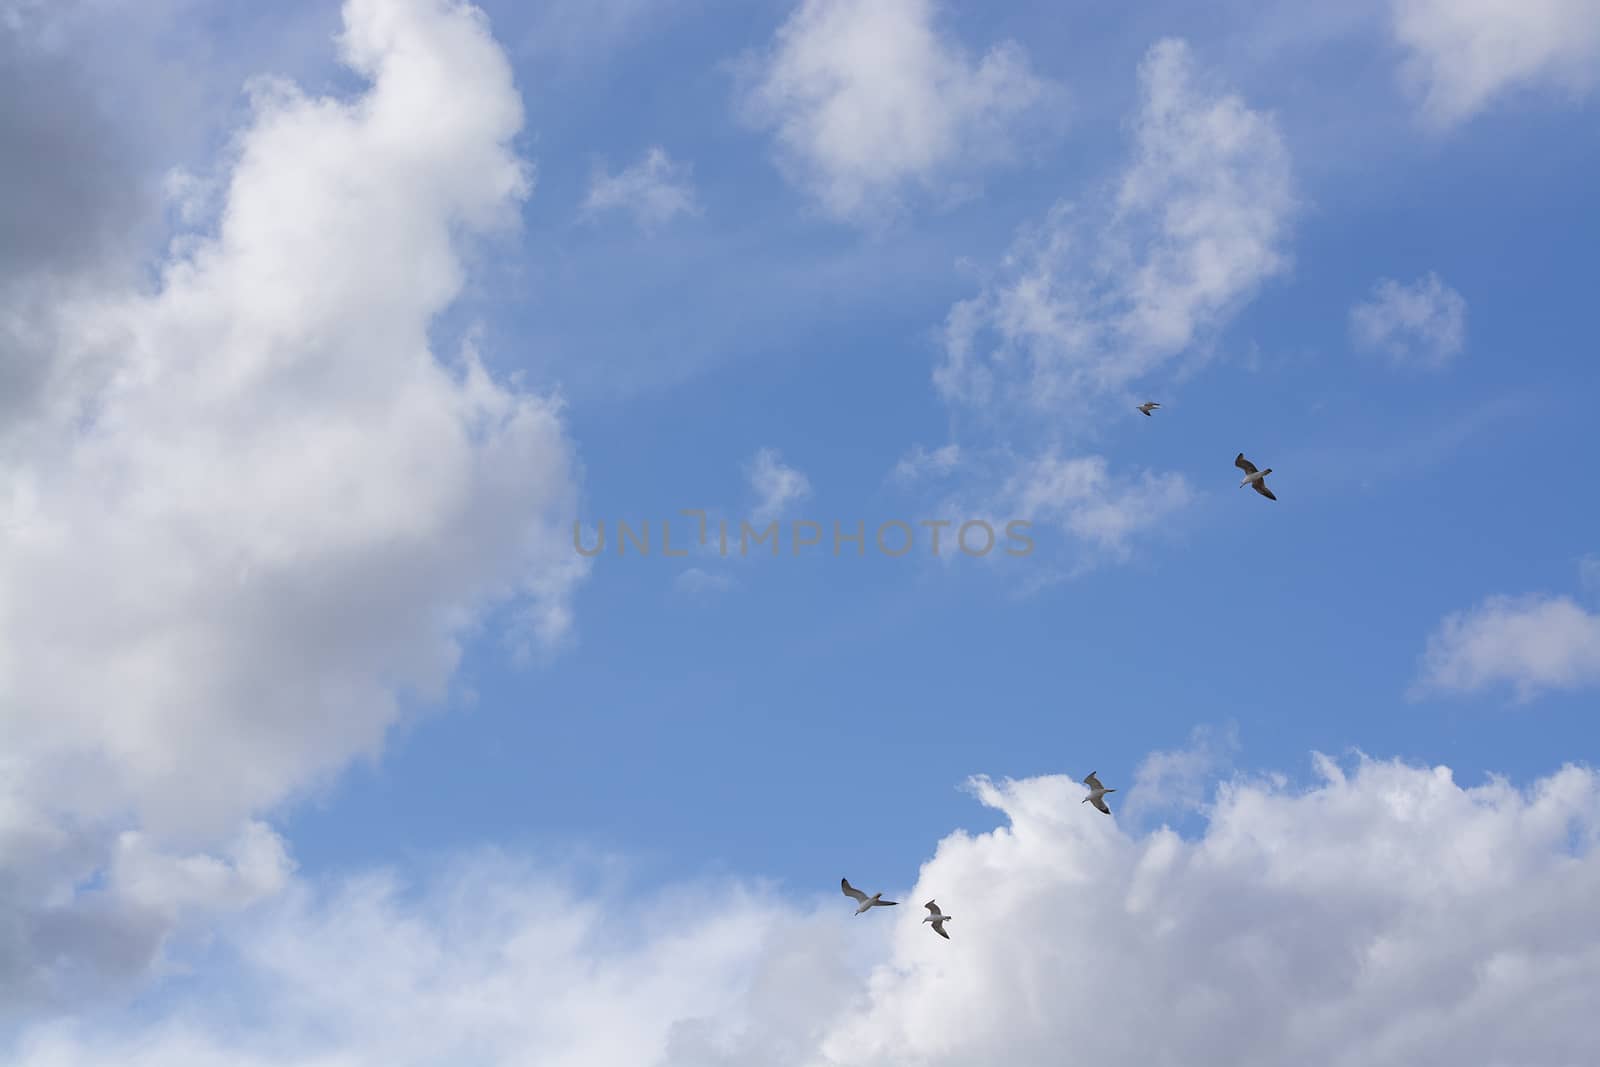 Seagulls flying overhead against cloudy and blue skies by ArtesiaWells